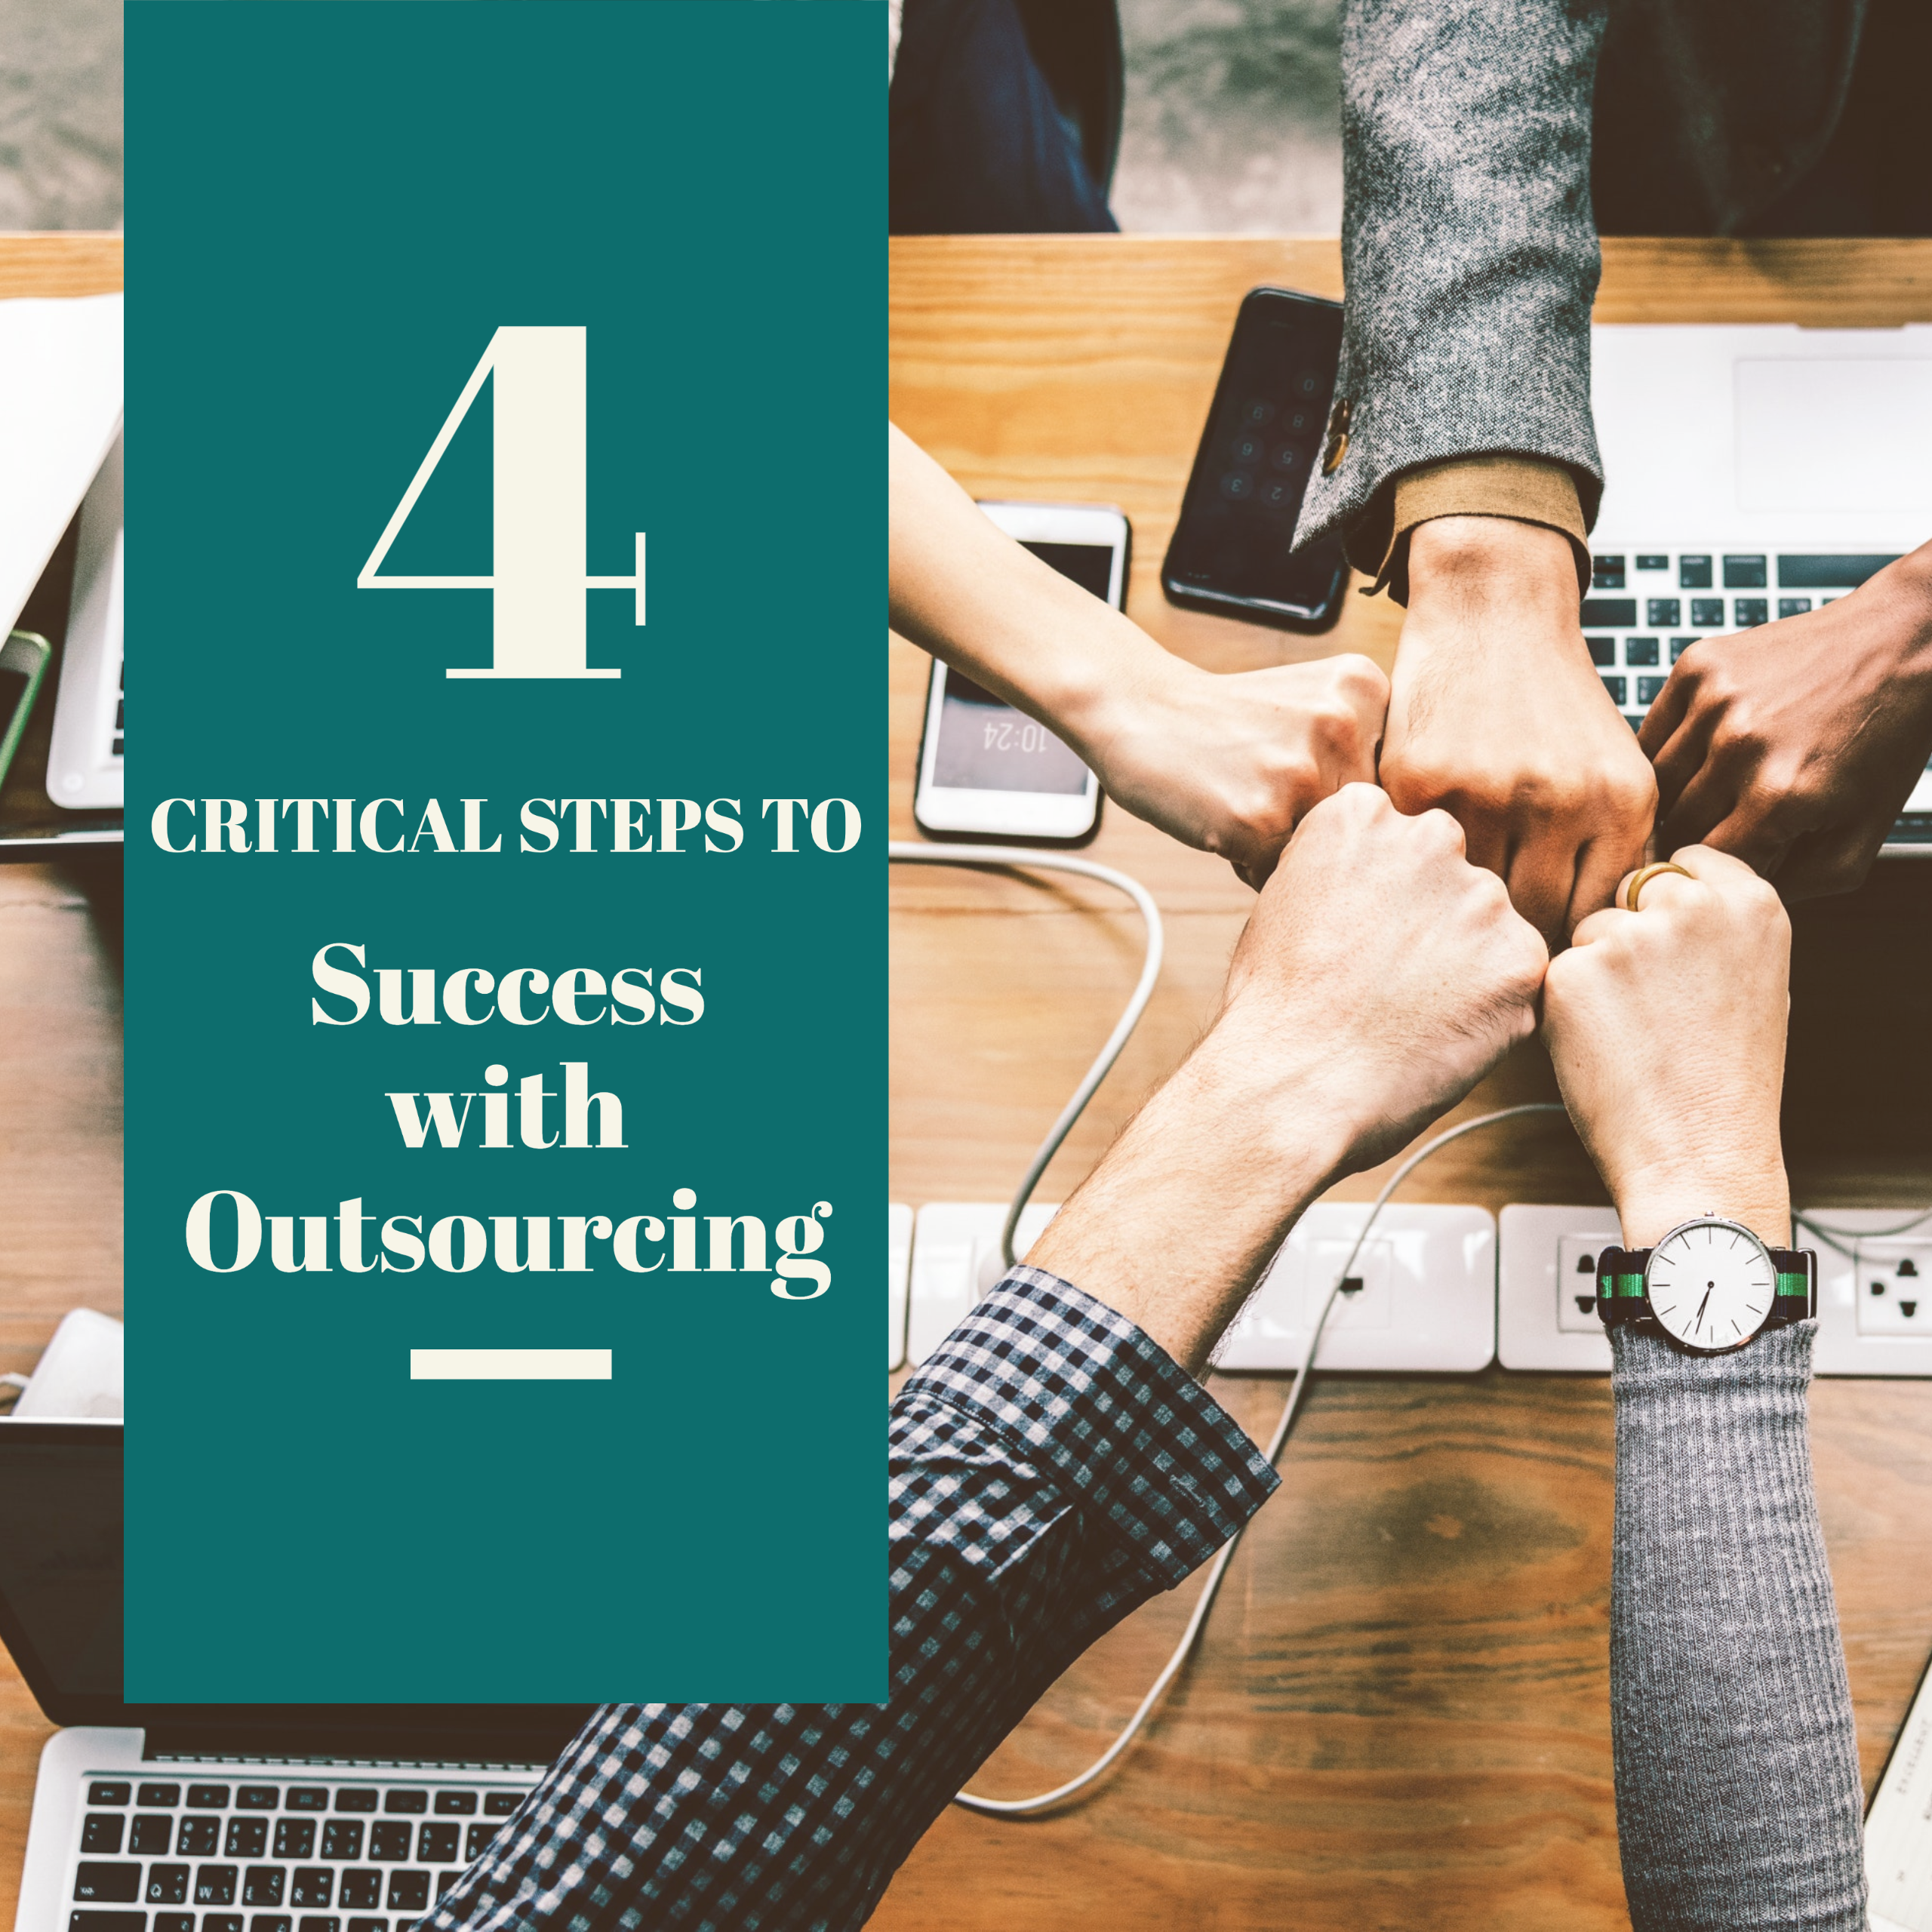 4 critical steps to outsourcing success overlaying a team fistbumping